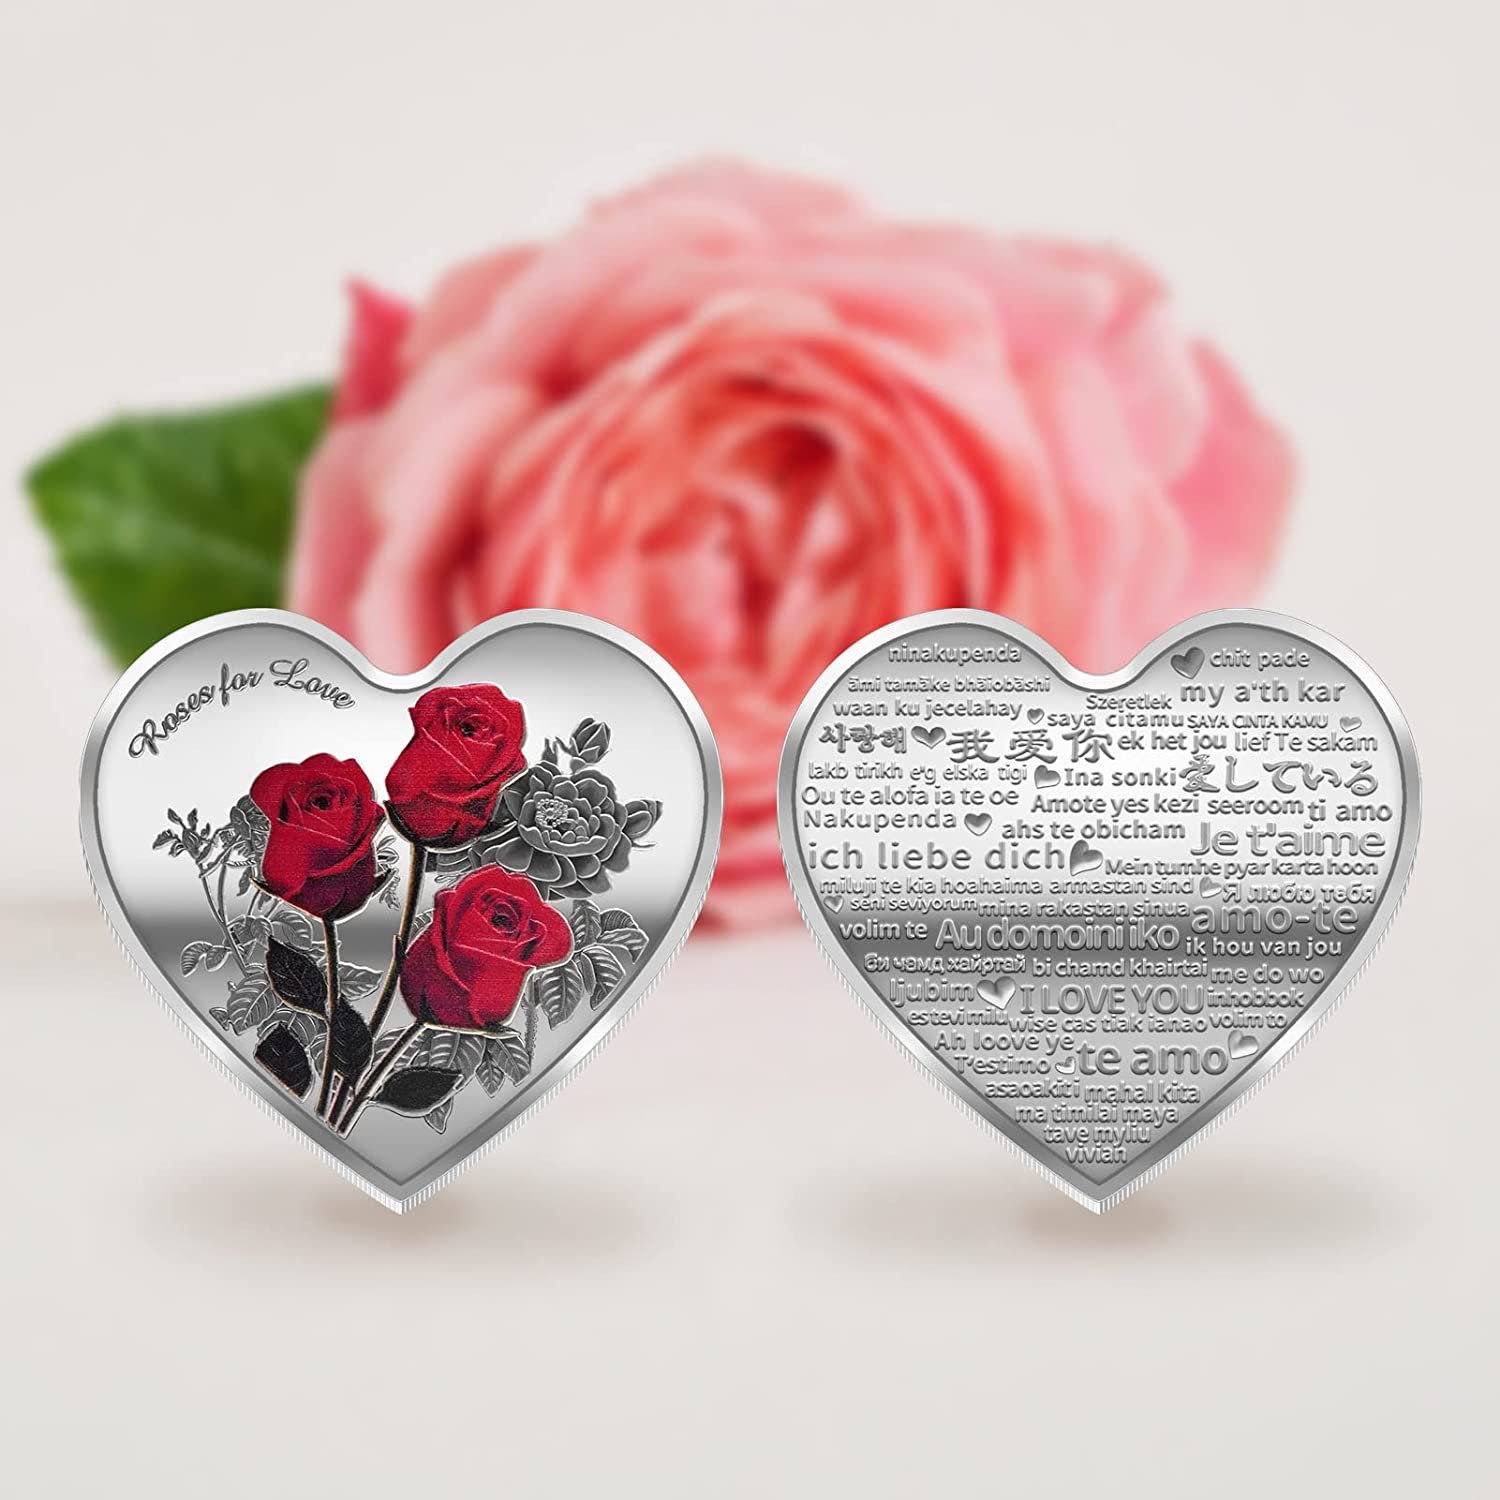 Women Gift Heart Shaped Rose Coin "I Love You" in 52 Languages